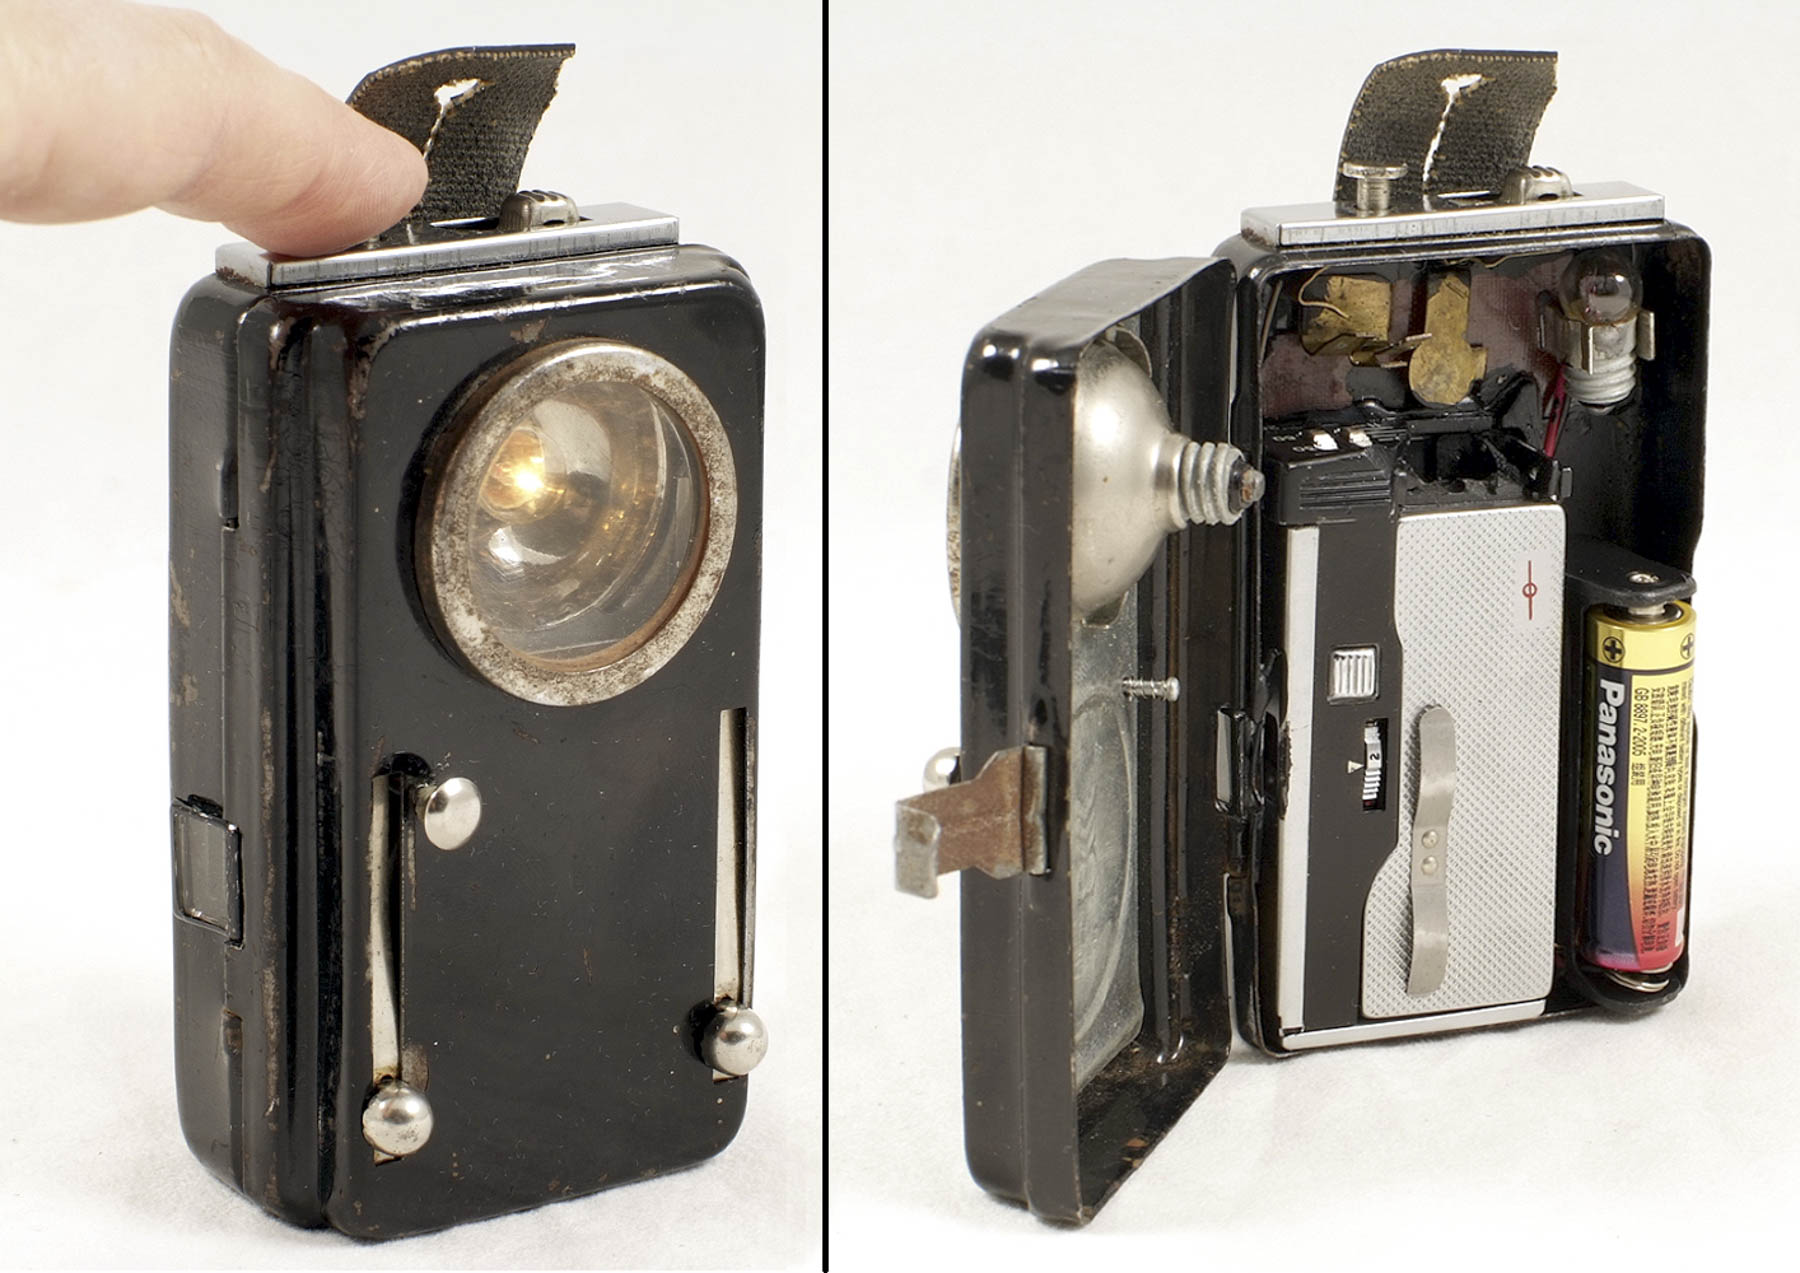 Soviet Spy-Camera Auction Will Let You Channel Your Inner 007 - Bloomberg